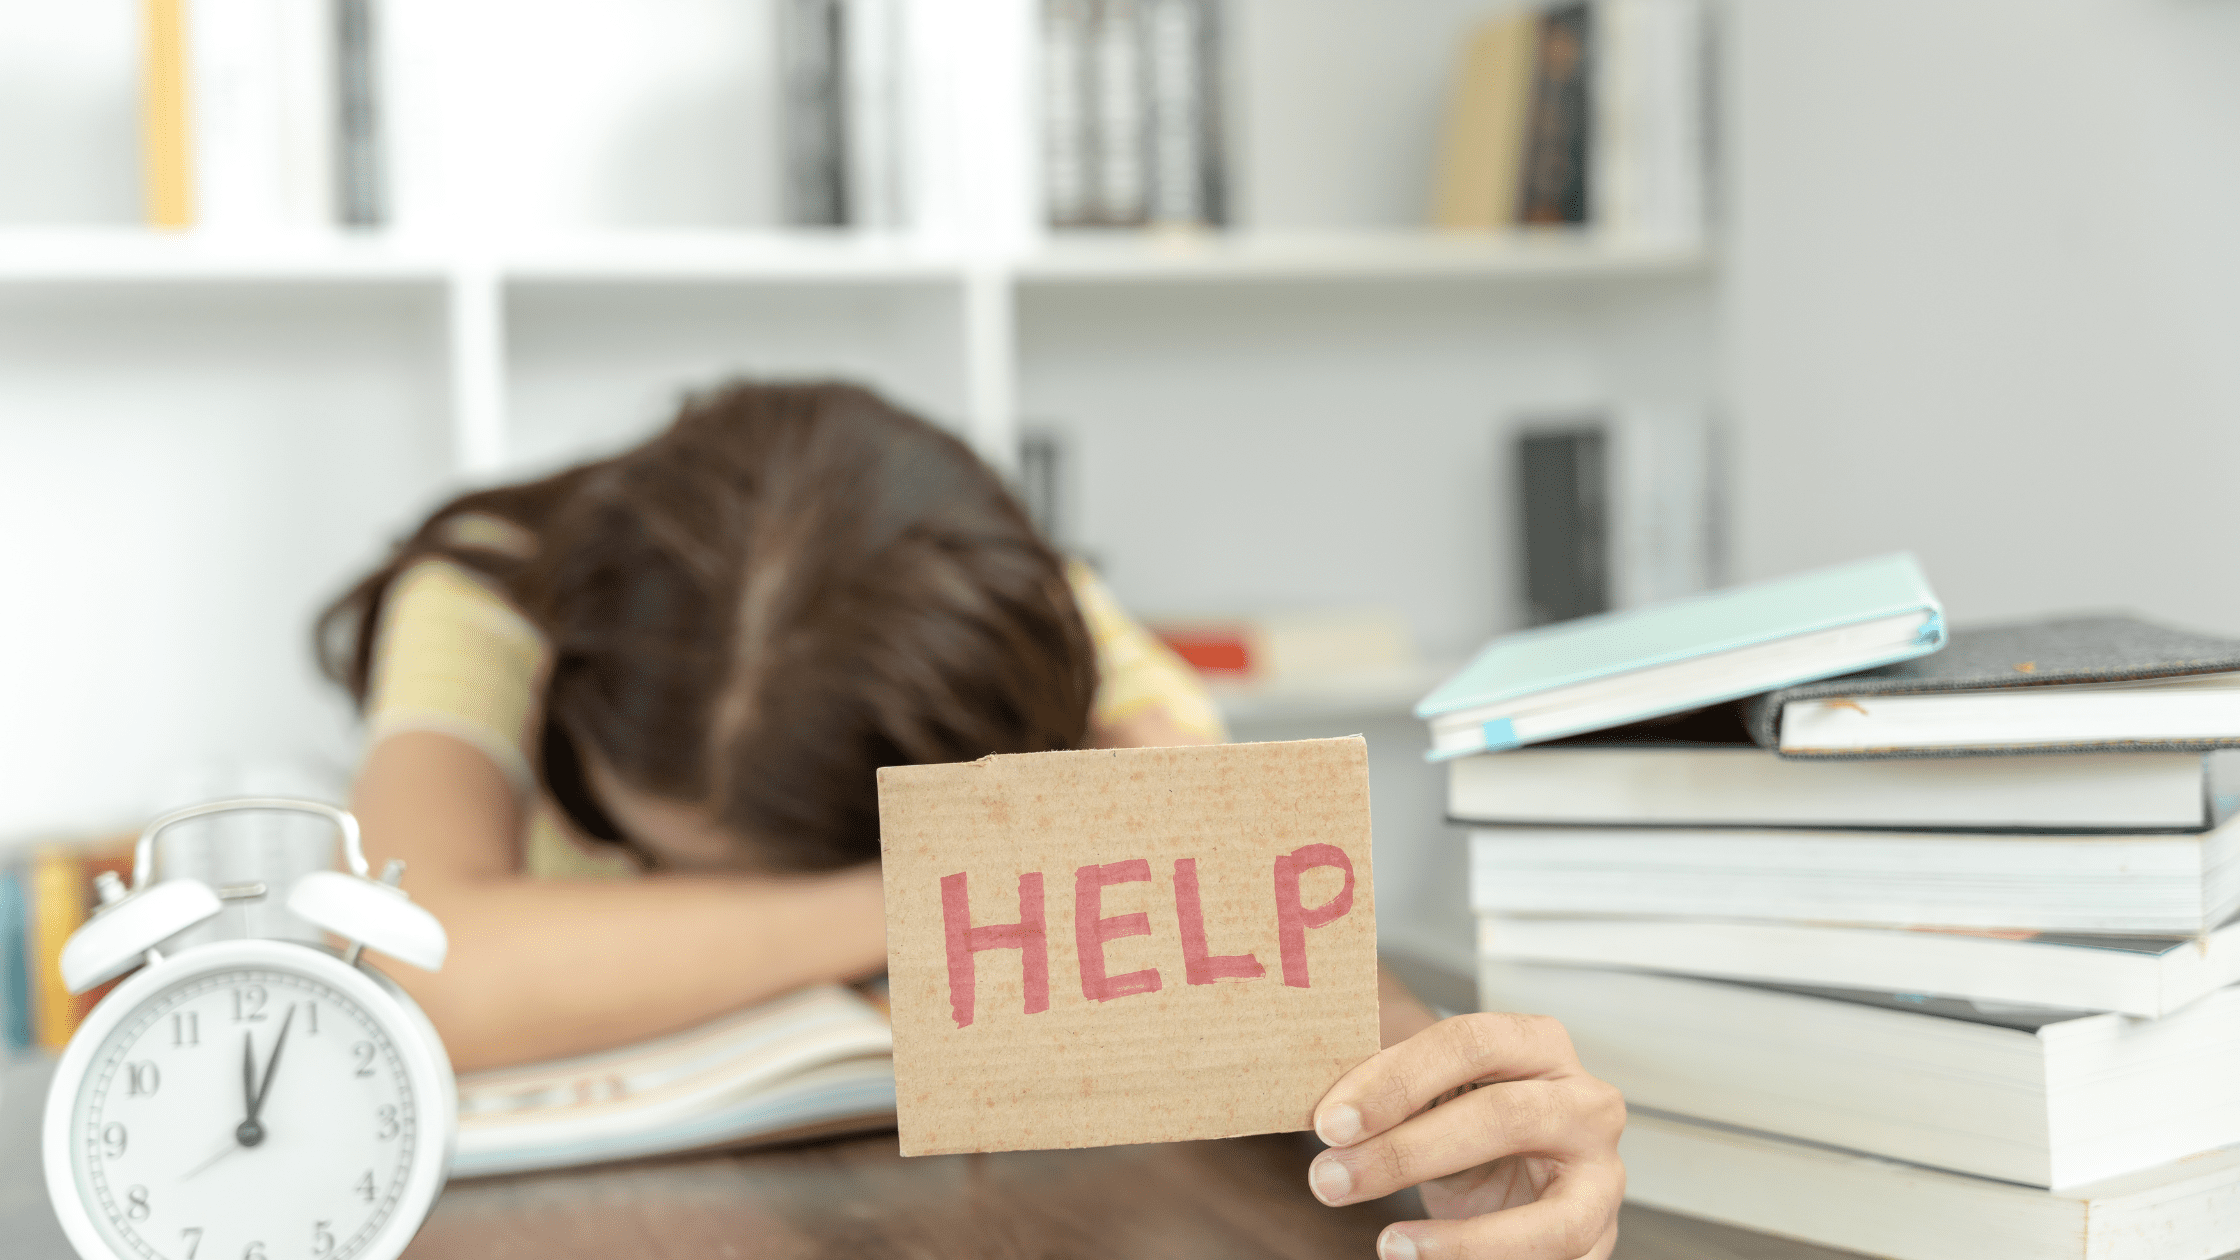 A medical school student laying her head down on a pile of USMLE Step 1 study books, holding up a "help" sign.